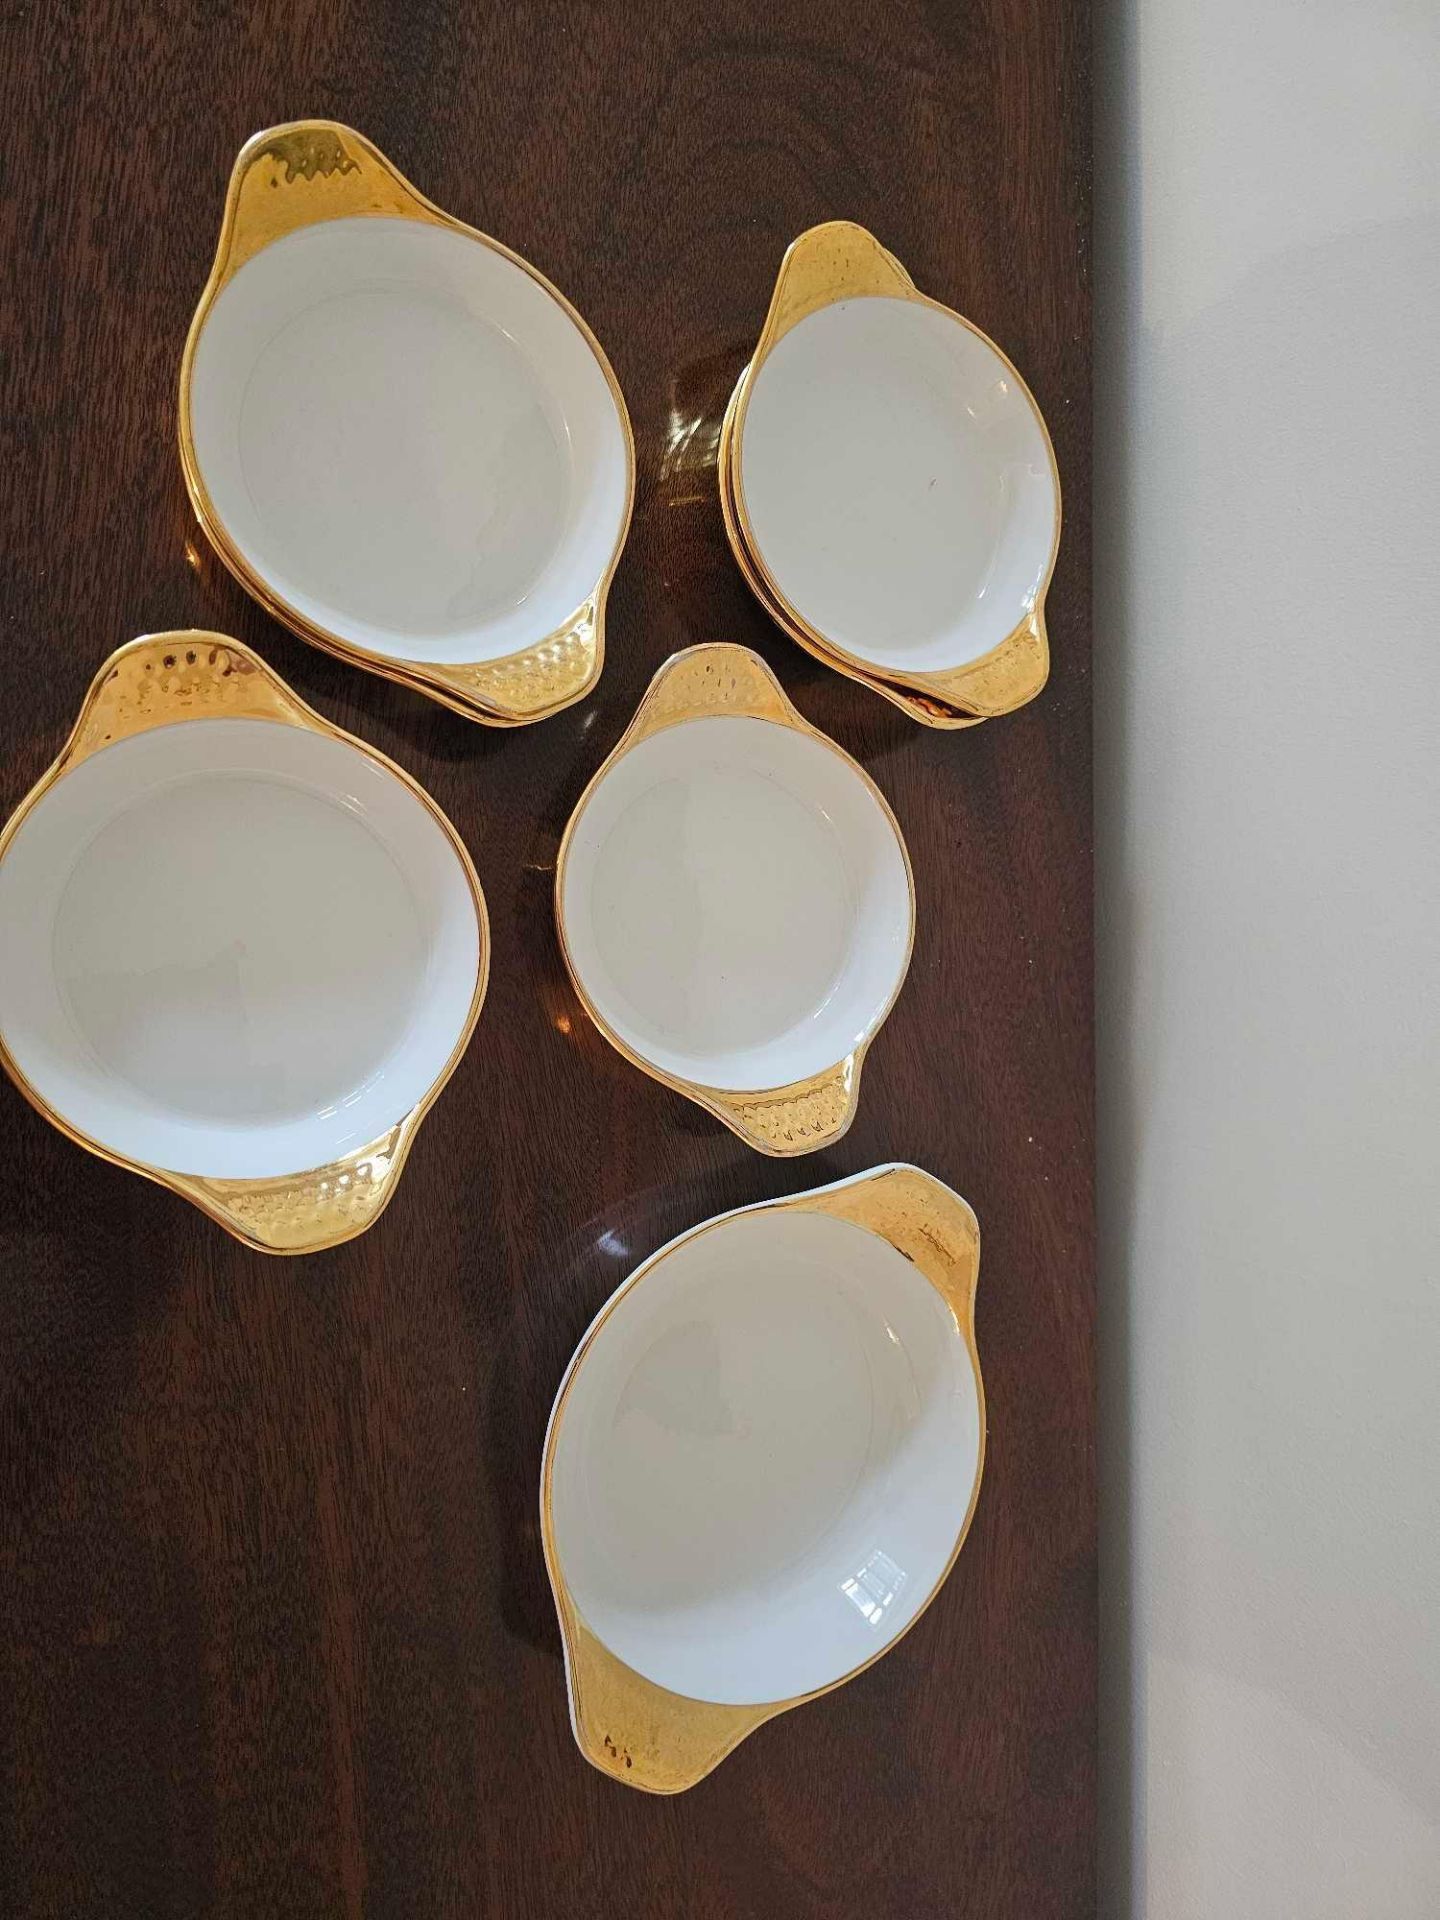 Royal Worcester A Set Of 8 Gold Gilded And White Lugged Rim Oven To Tableware Porcelain Dishes